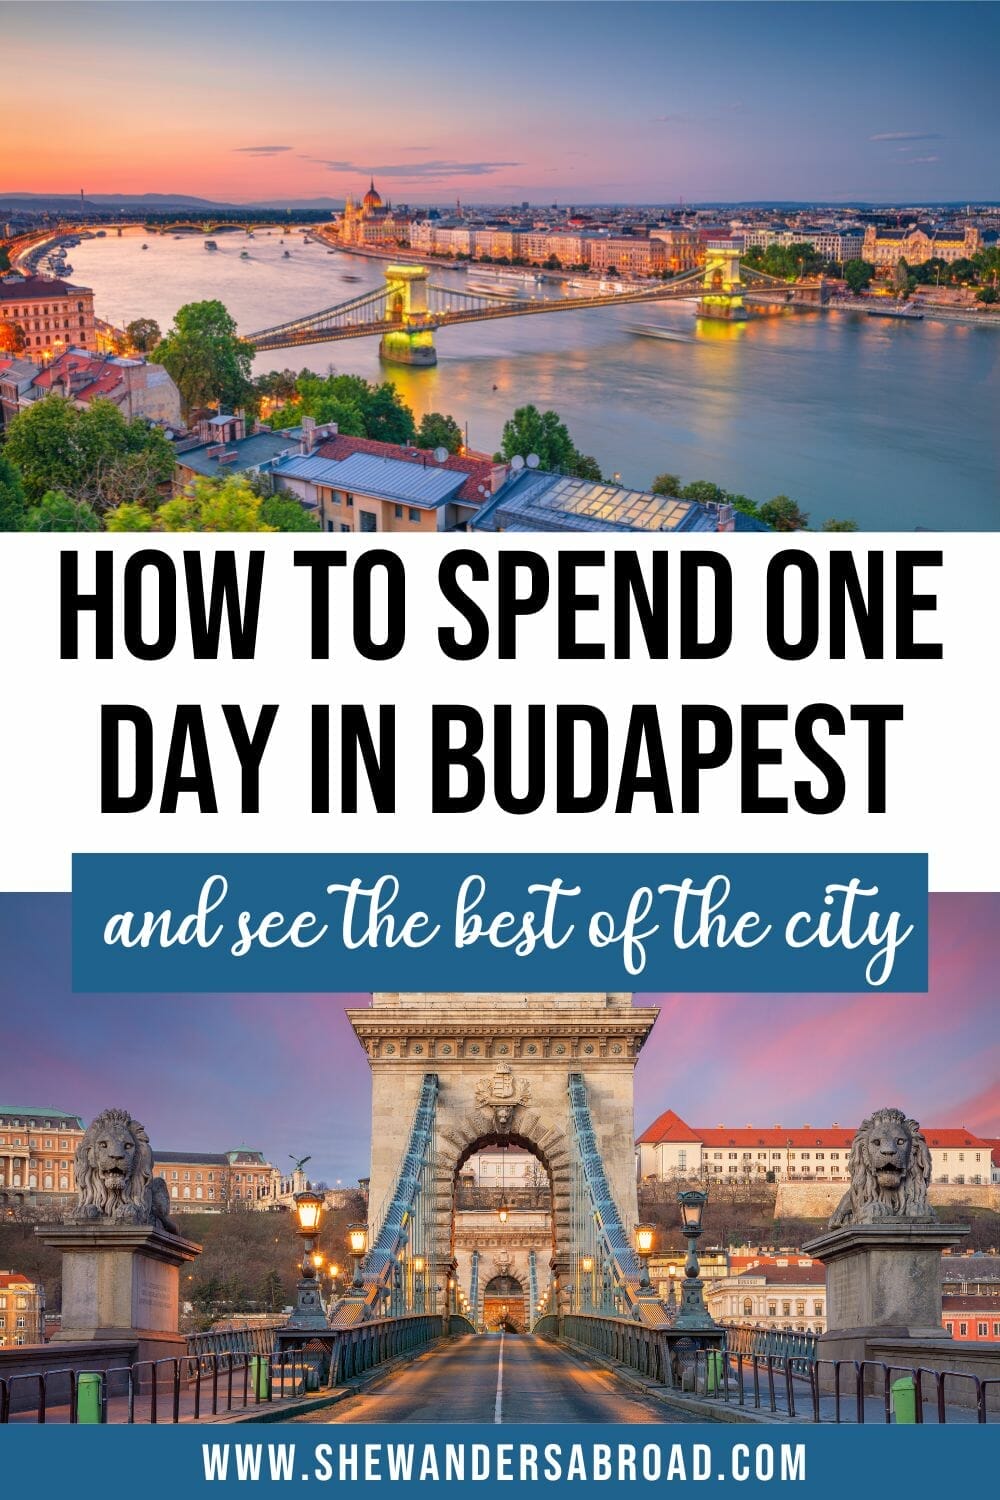 One Day in Budapest: A Local’s Guide to Touring Budapest in a Day